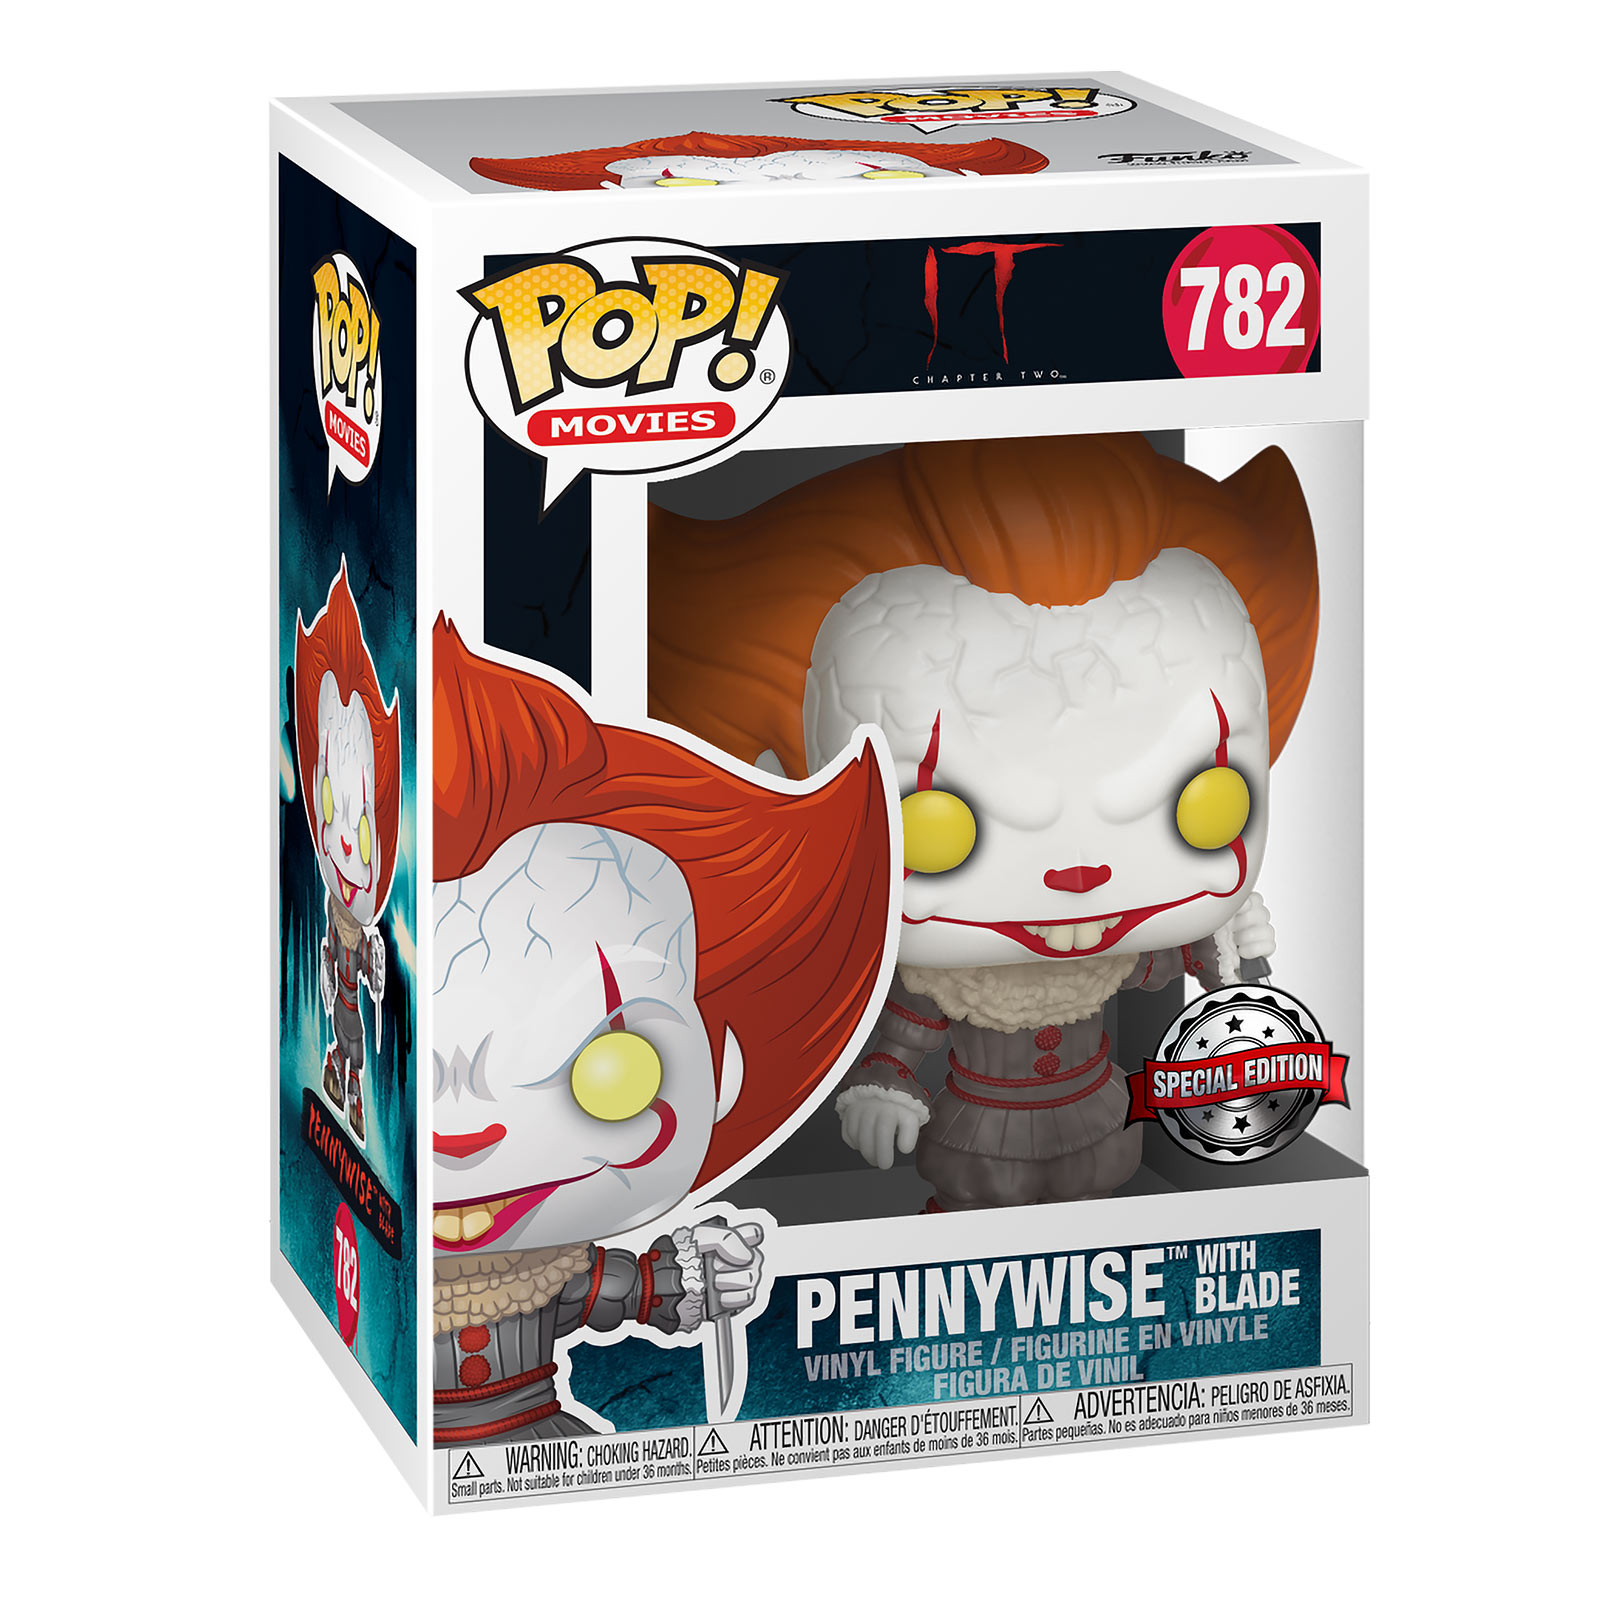 Stephen King's ES - Pennywise with knife Funko Pop Figurine